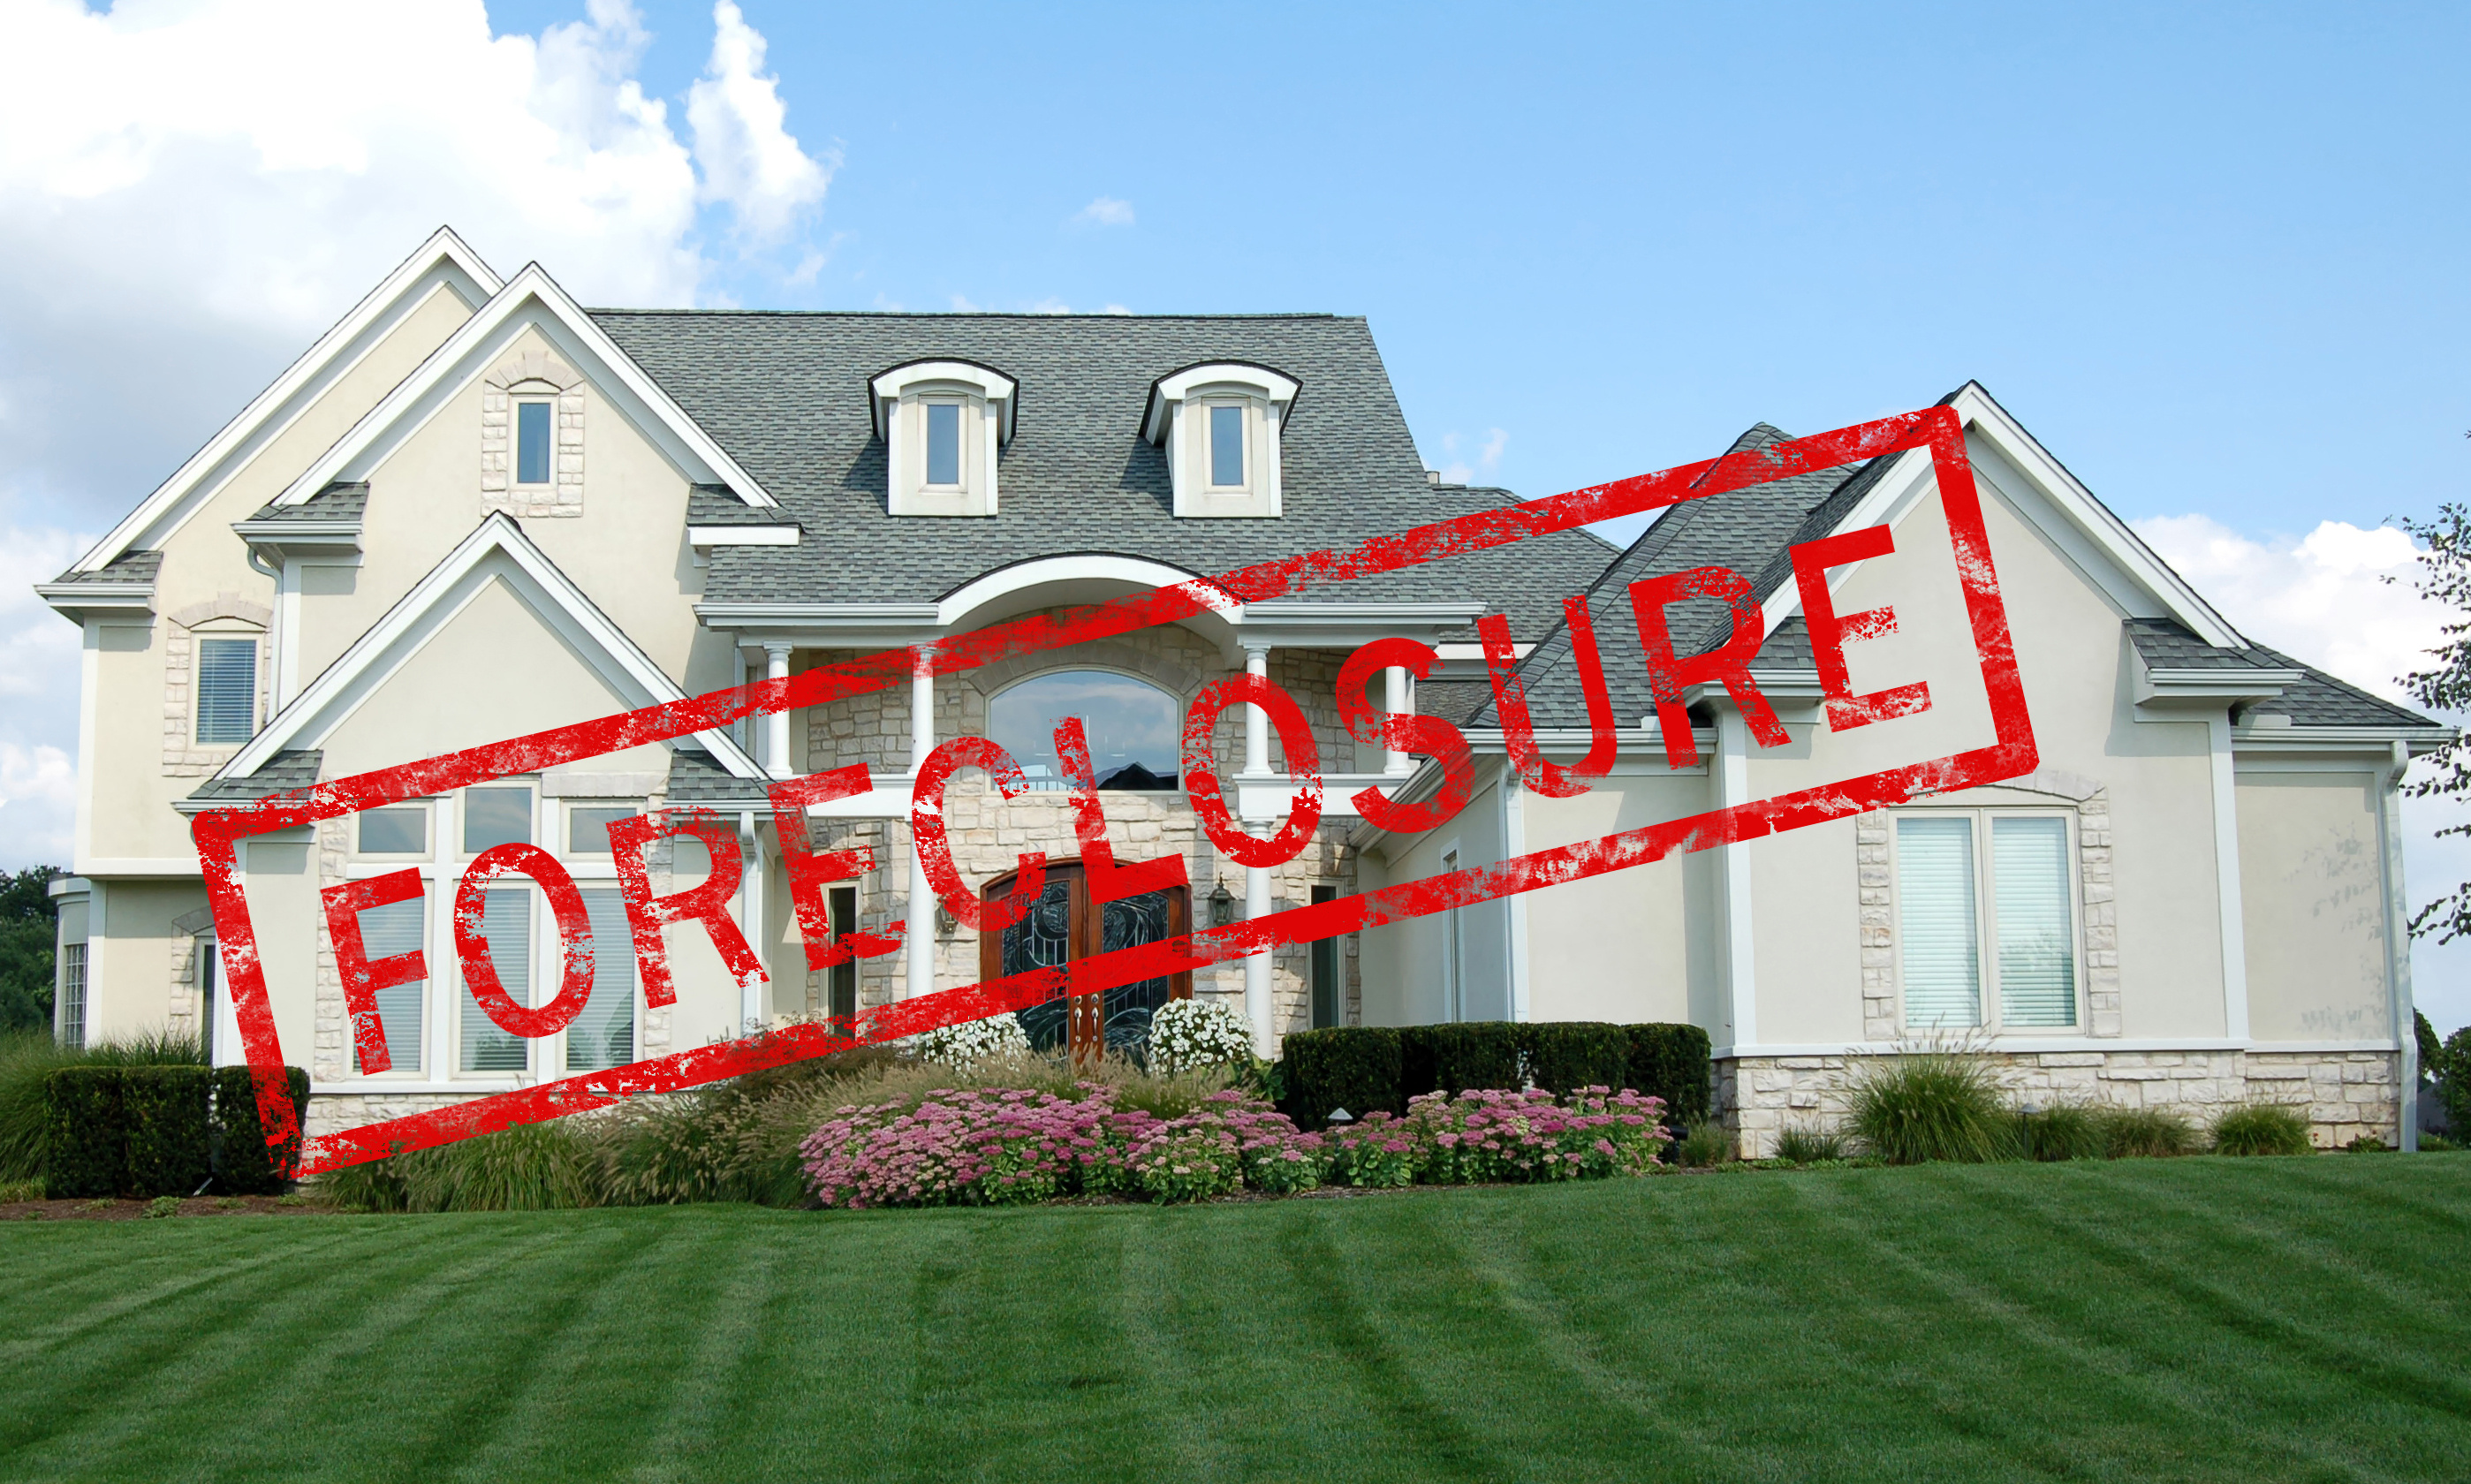 Call Timeline Appraisal Services, LLC to discuss appraisals on Maricopa foreclosures